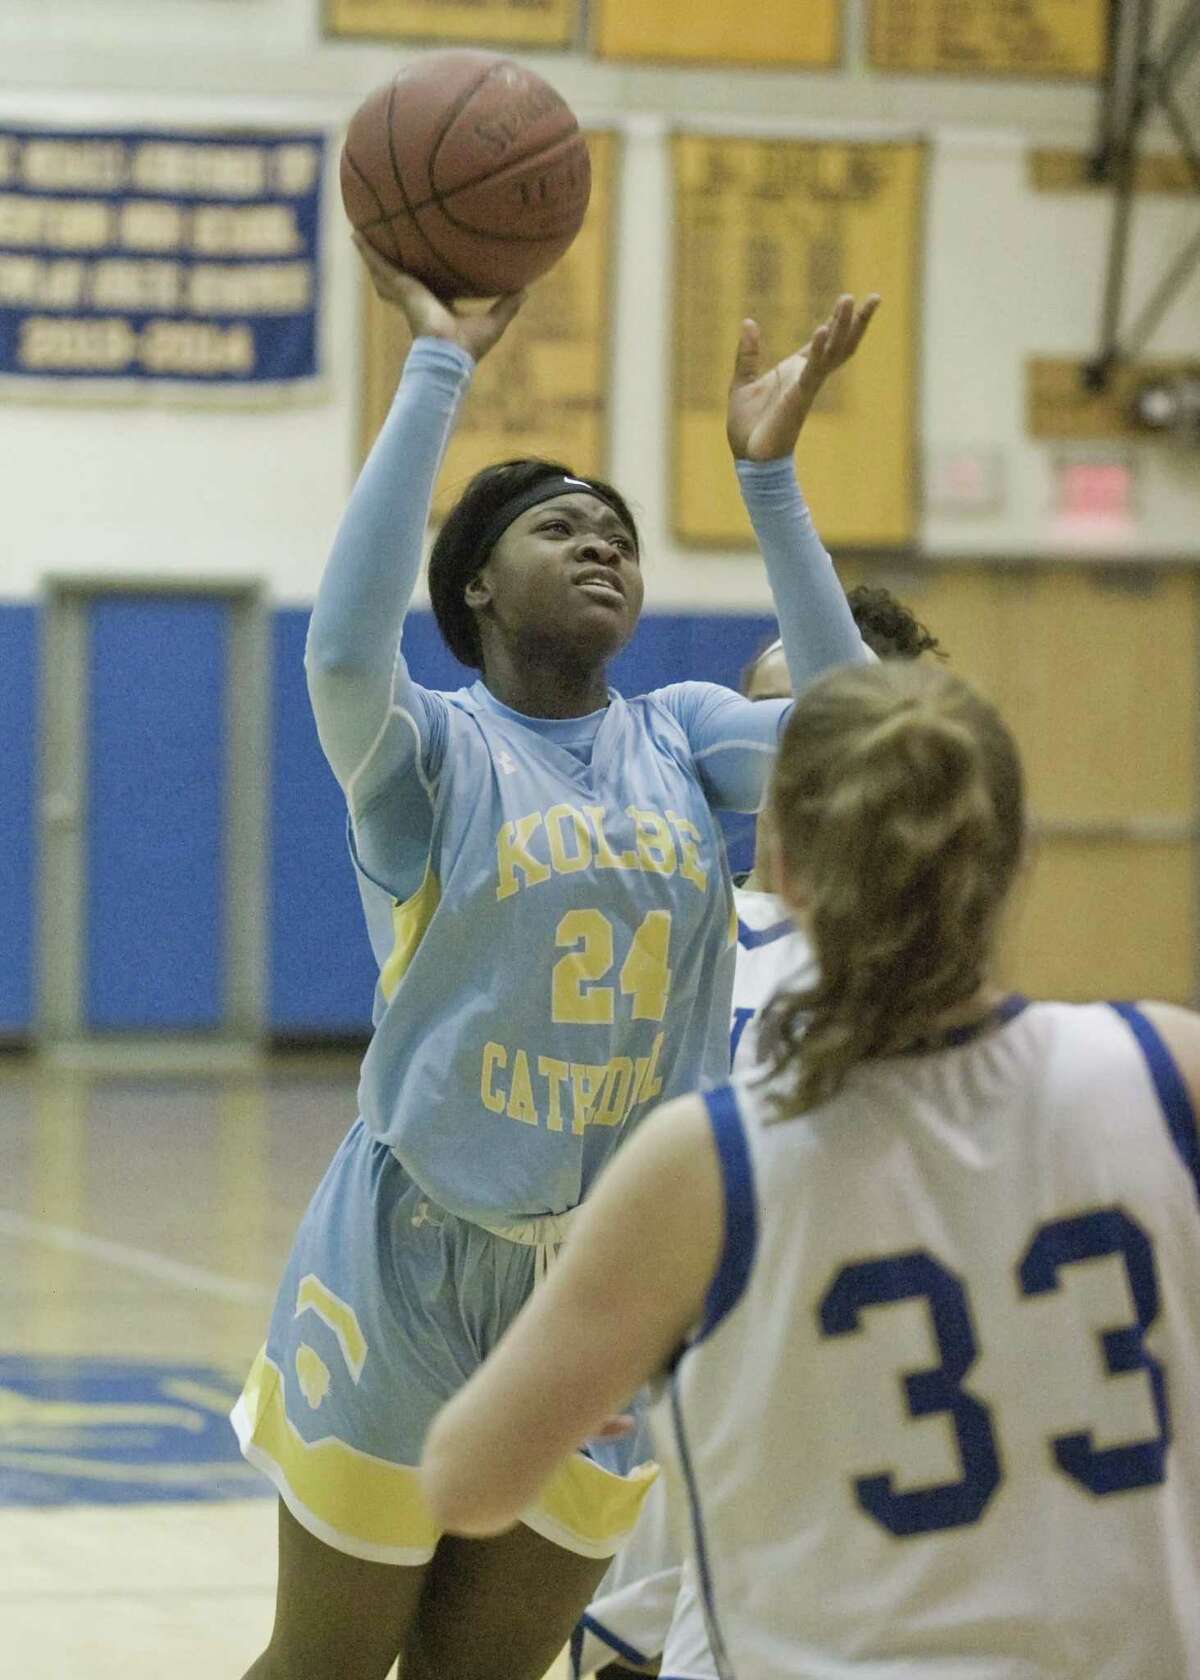 Kolbe Cathedral High School's Brianna Meekins gets off a shot in the SWC girls basketball tournament quarterfinal game against Newtown High School, played at Newtown. Monday, Feb. 18, 2019